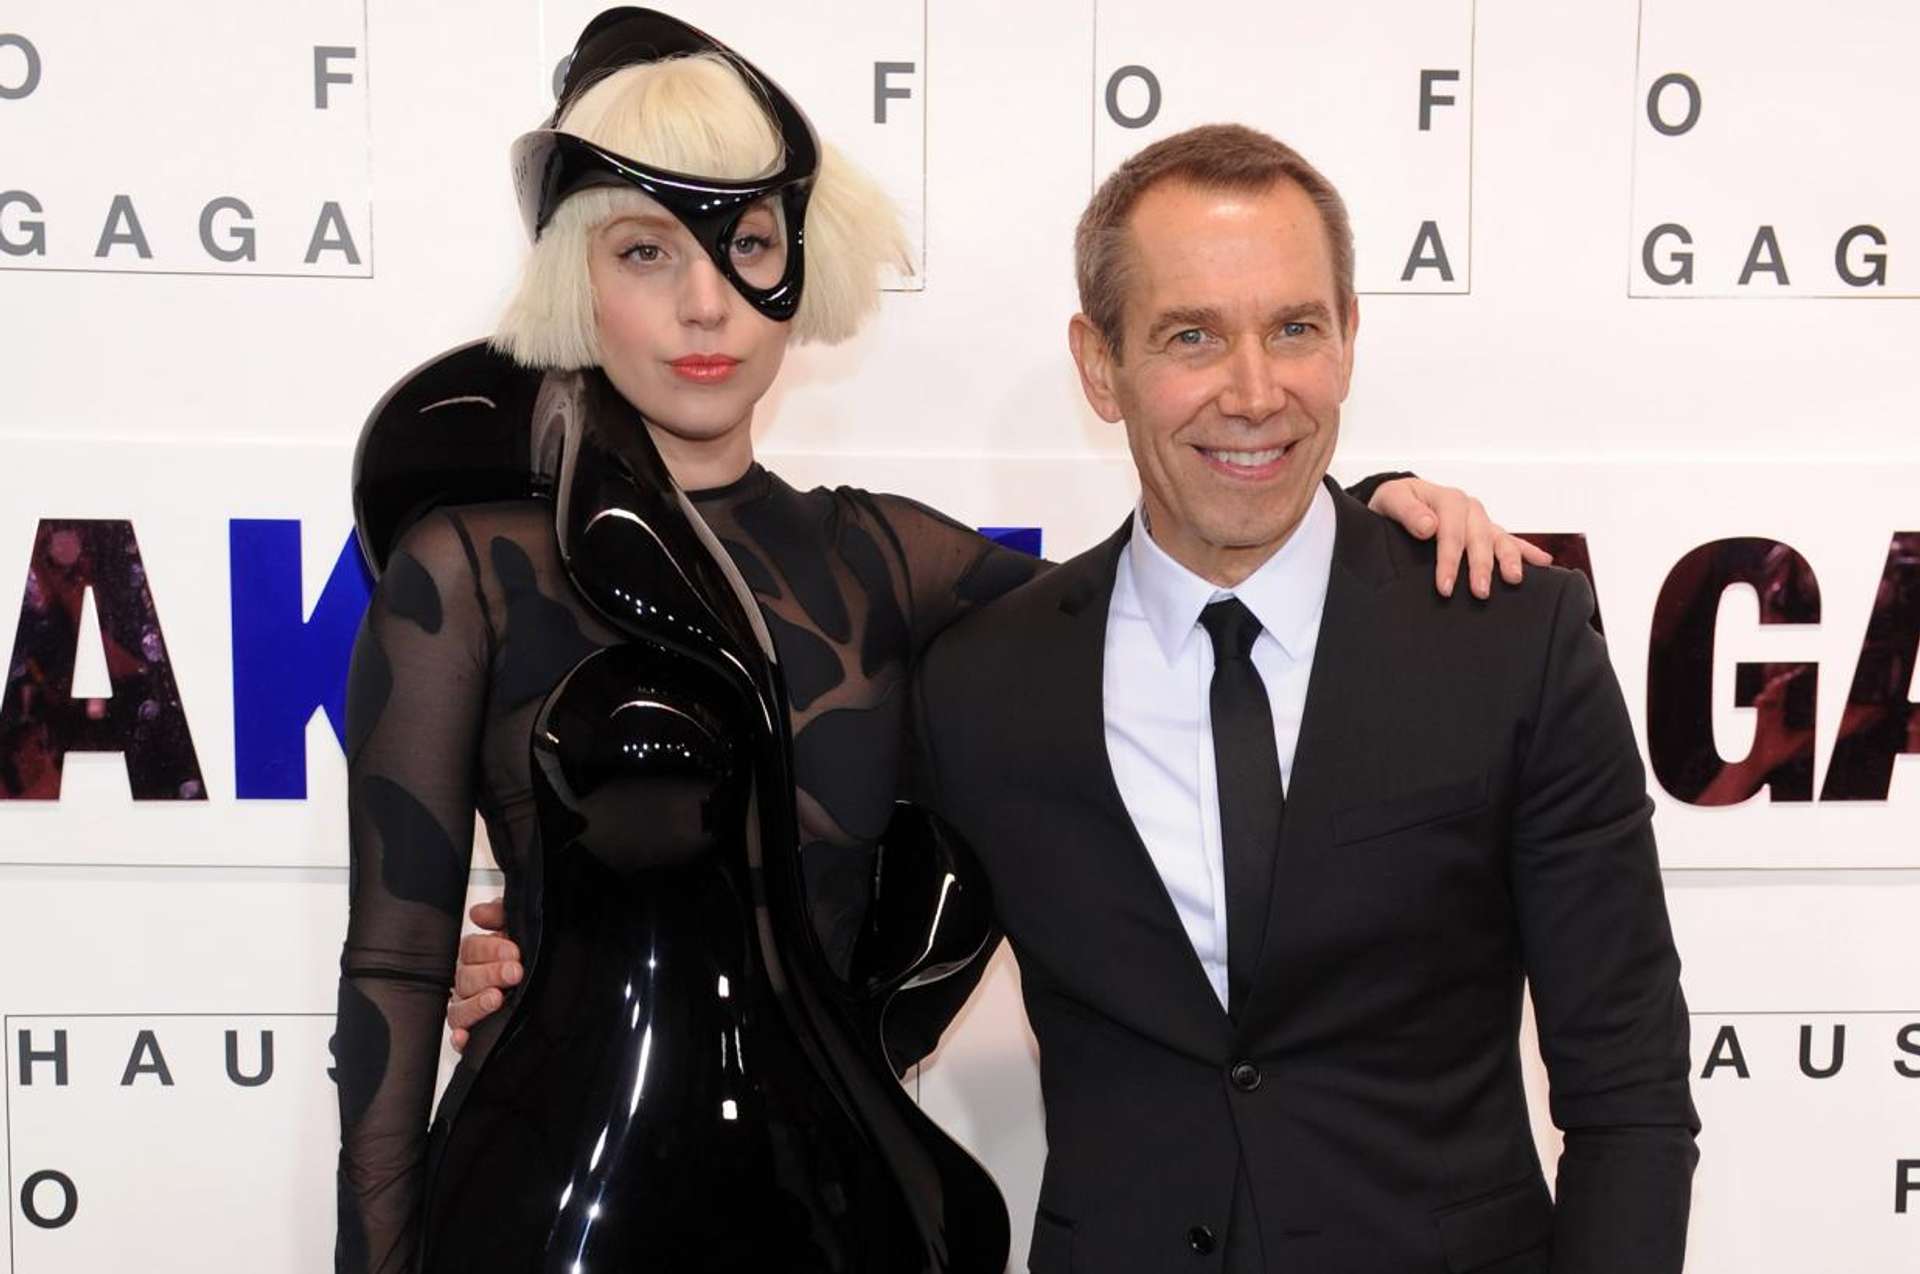 A photograph of artist Jeff Koons alongside musician Lady Gaga. They are embracing against a white background.